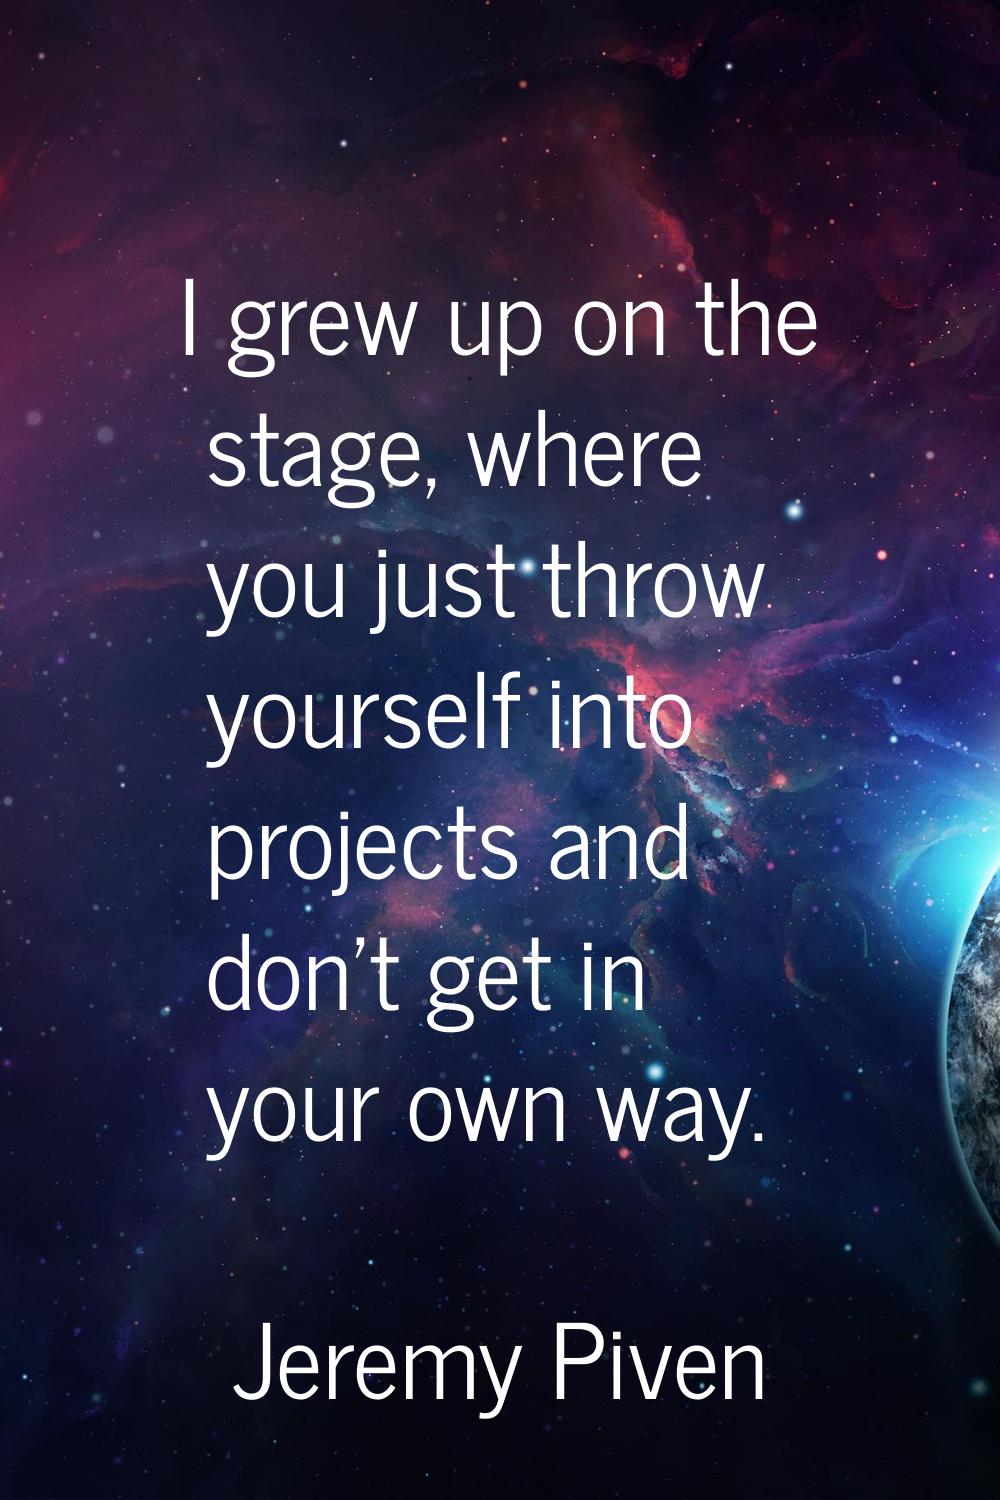 I grew up on the stage, where you just throw yourself into projects and don't get in your own way.